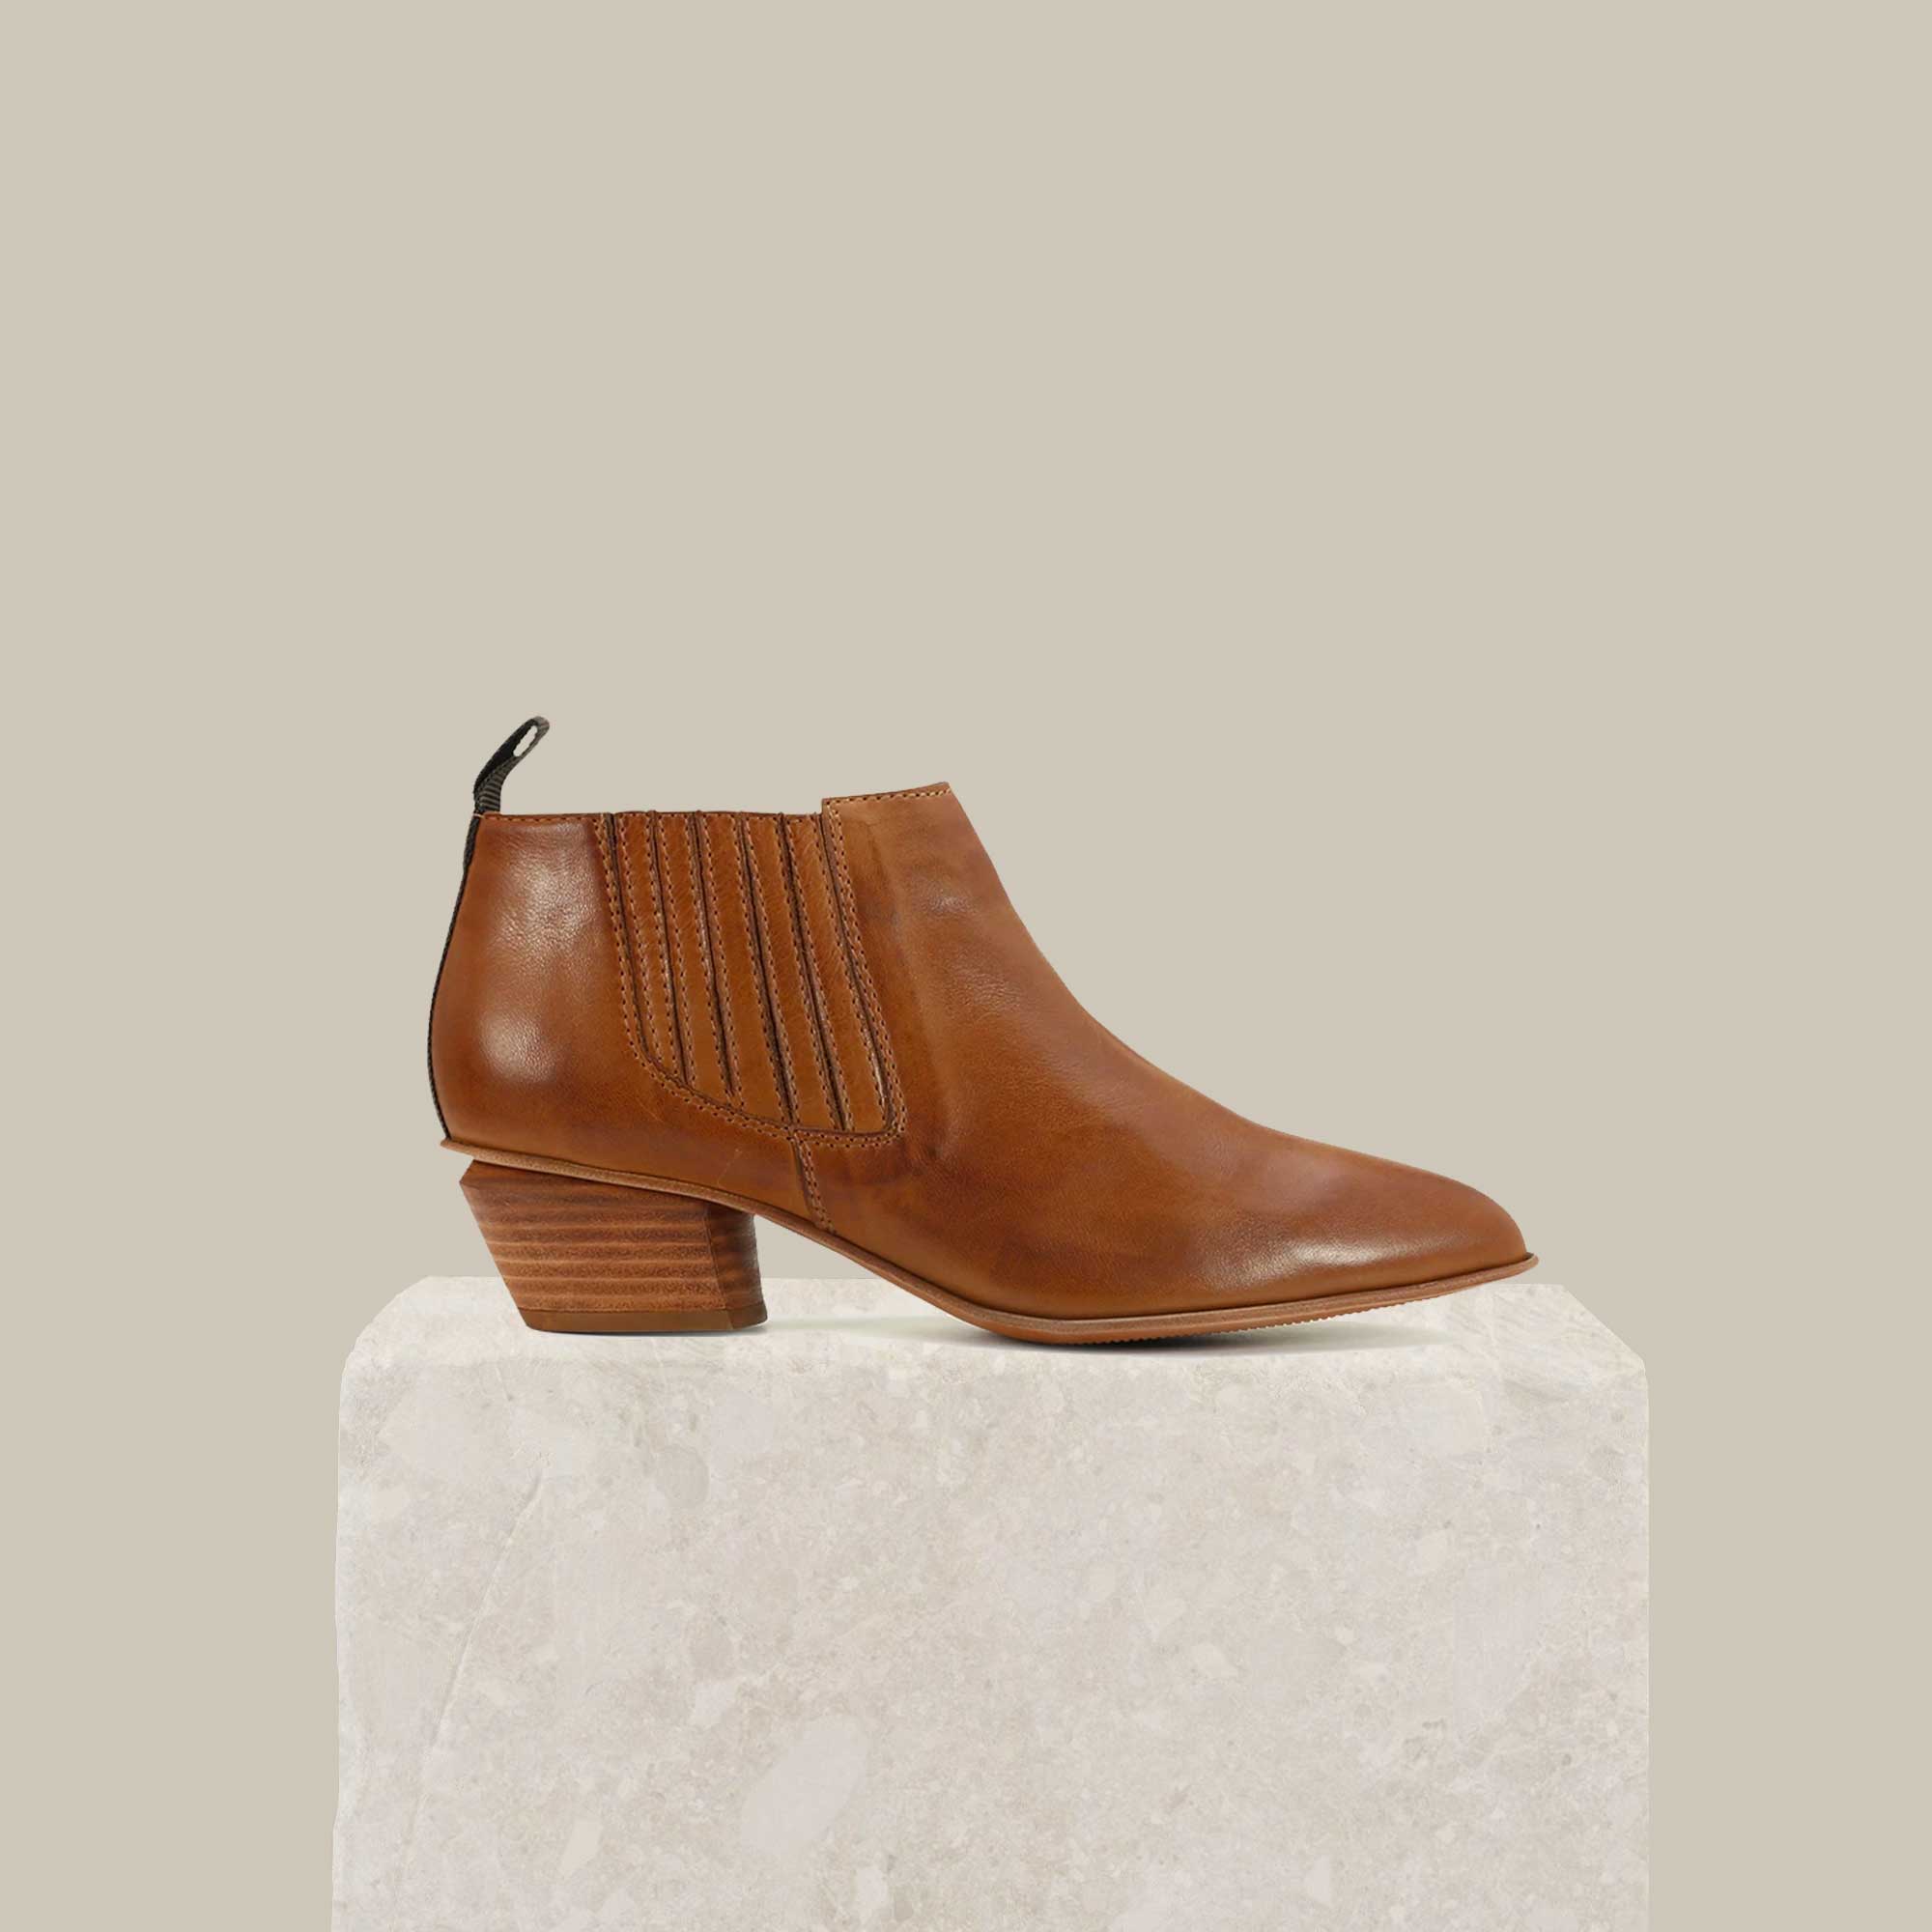 WEST - EOS Footwear - Ankle Boots #color_Brandy